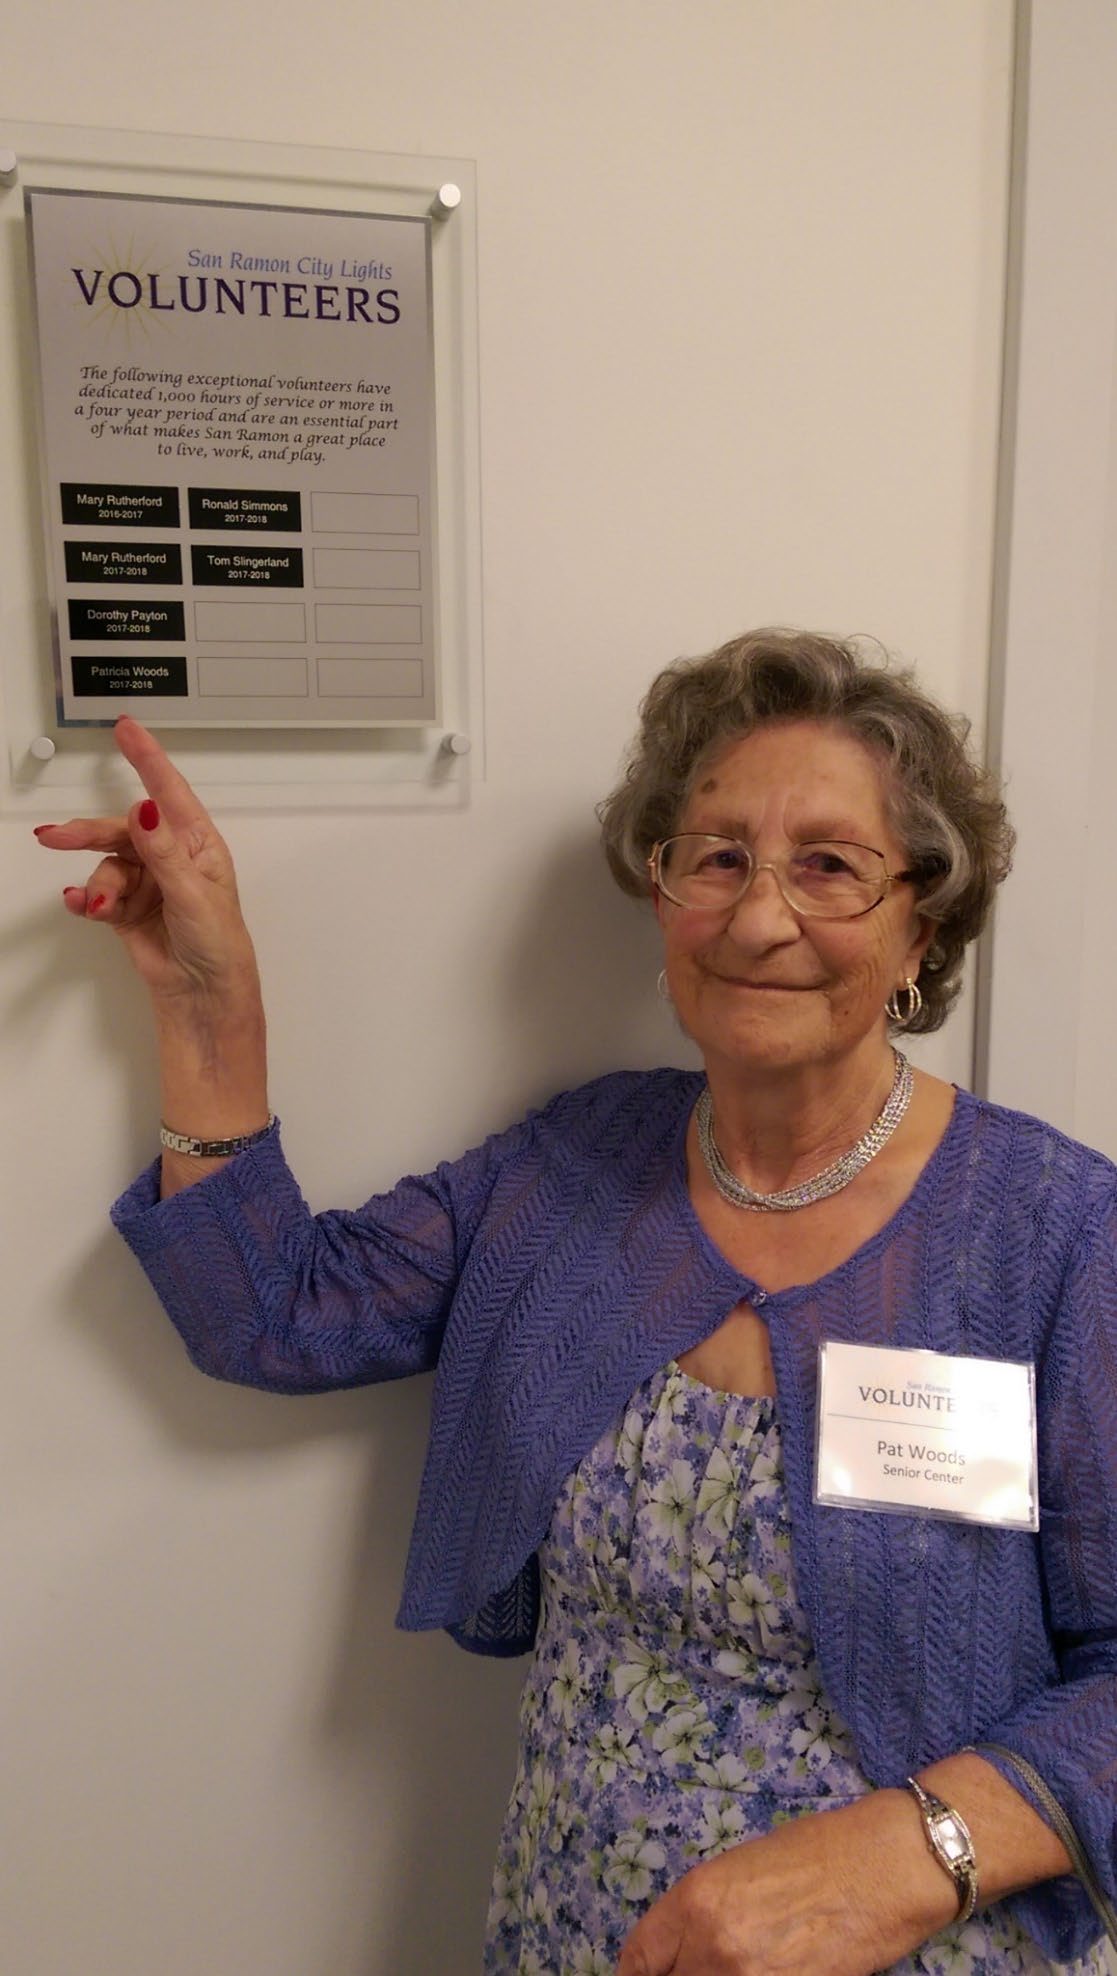 Pat Woods pointing at the volunteer recognition plaque with her name included